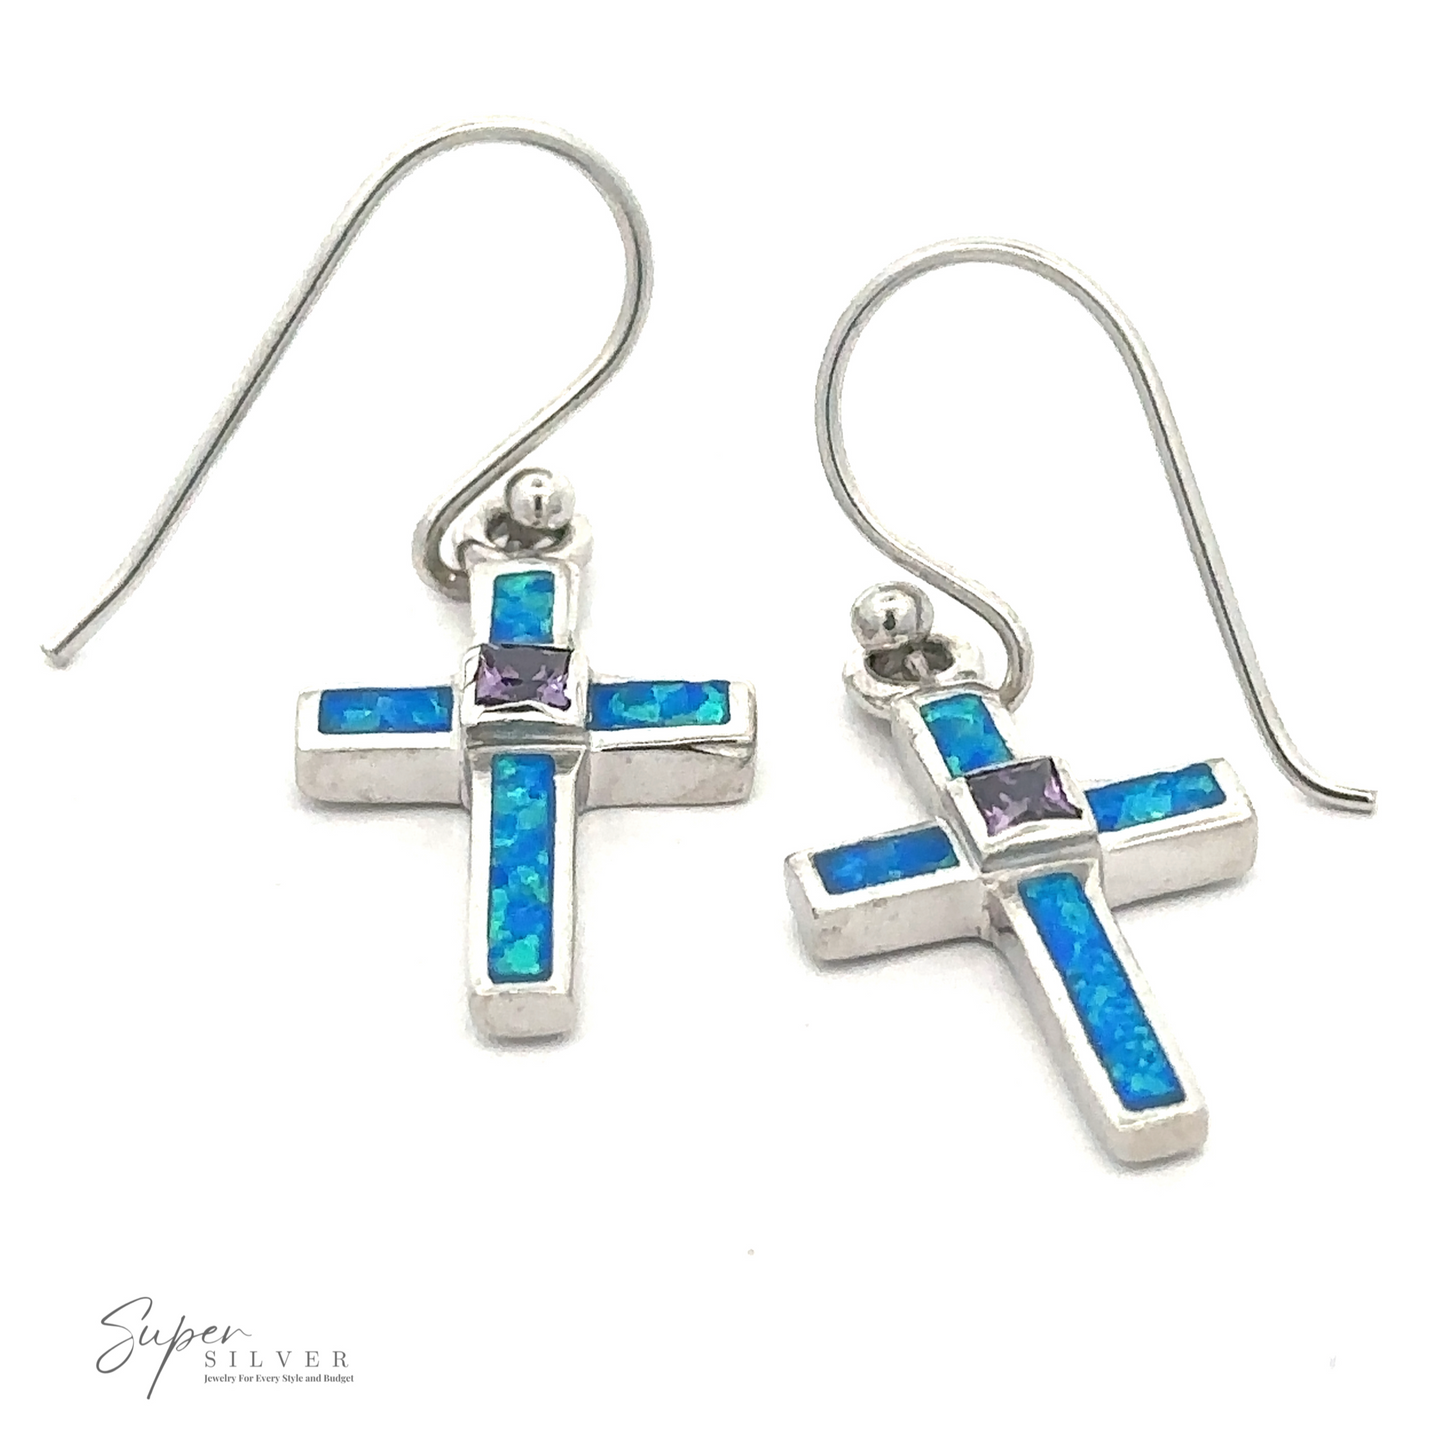 A pair of Blue Opal Cross Earrings With Amethyst Center Stone, with hook-style ear wires. "Super Silver" logo in the bottom left corner.